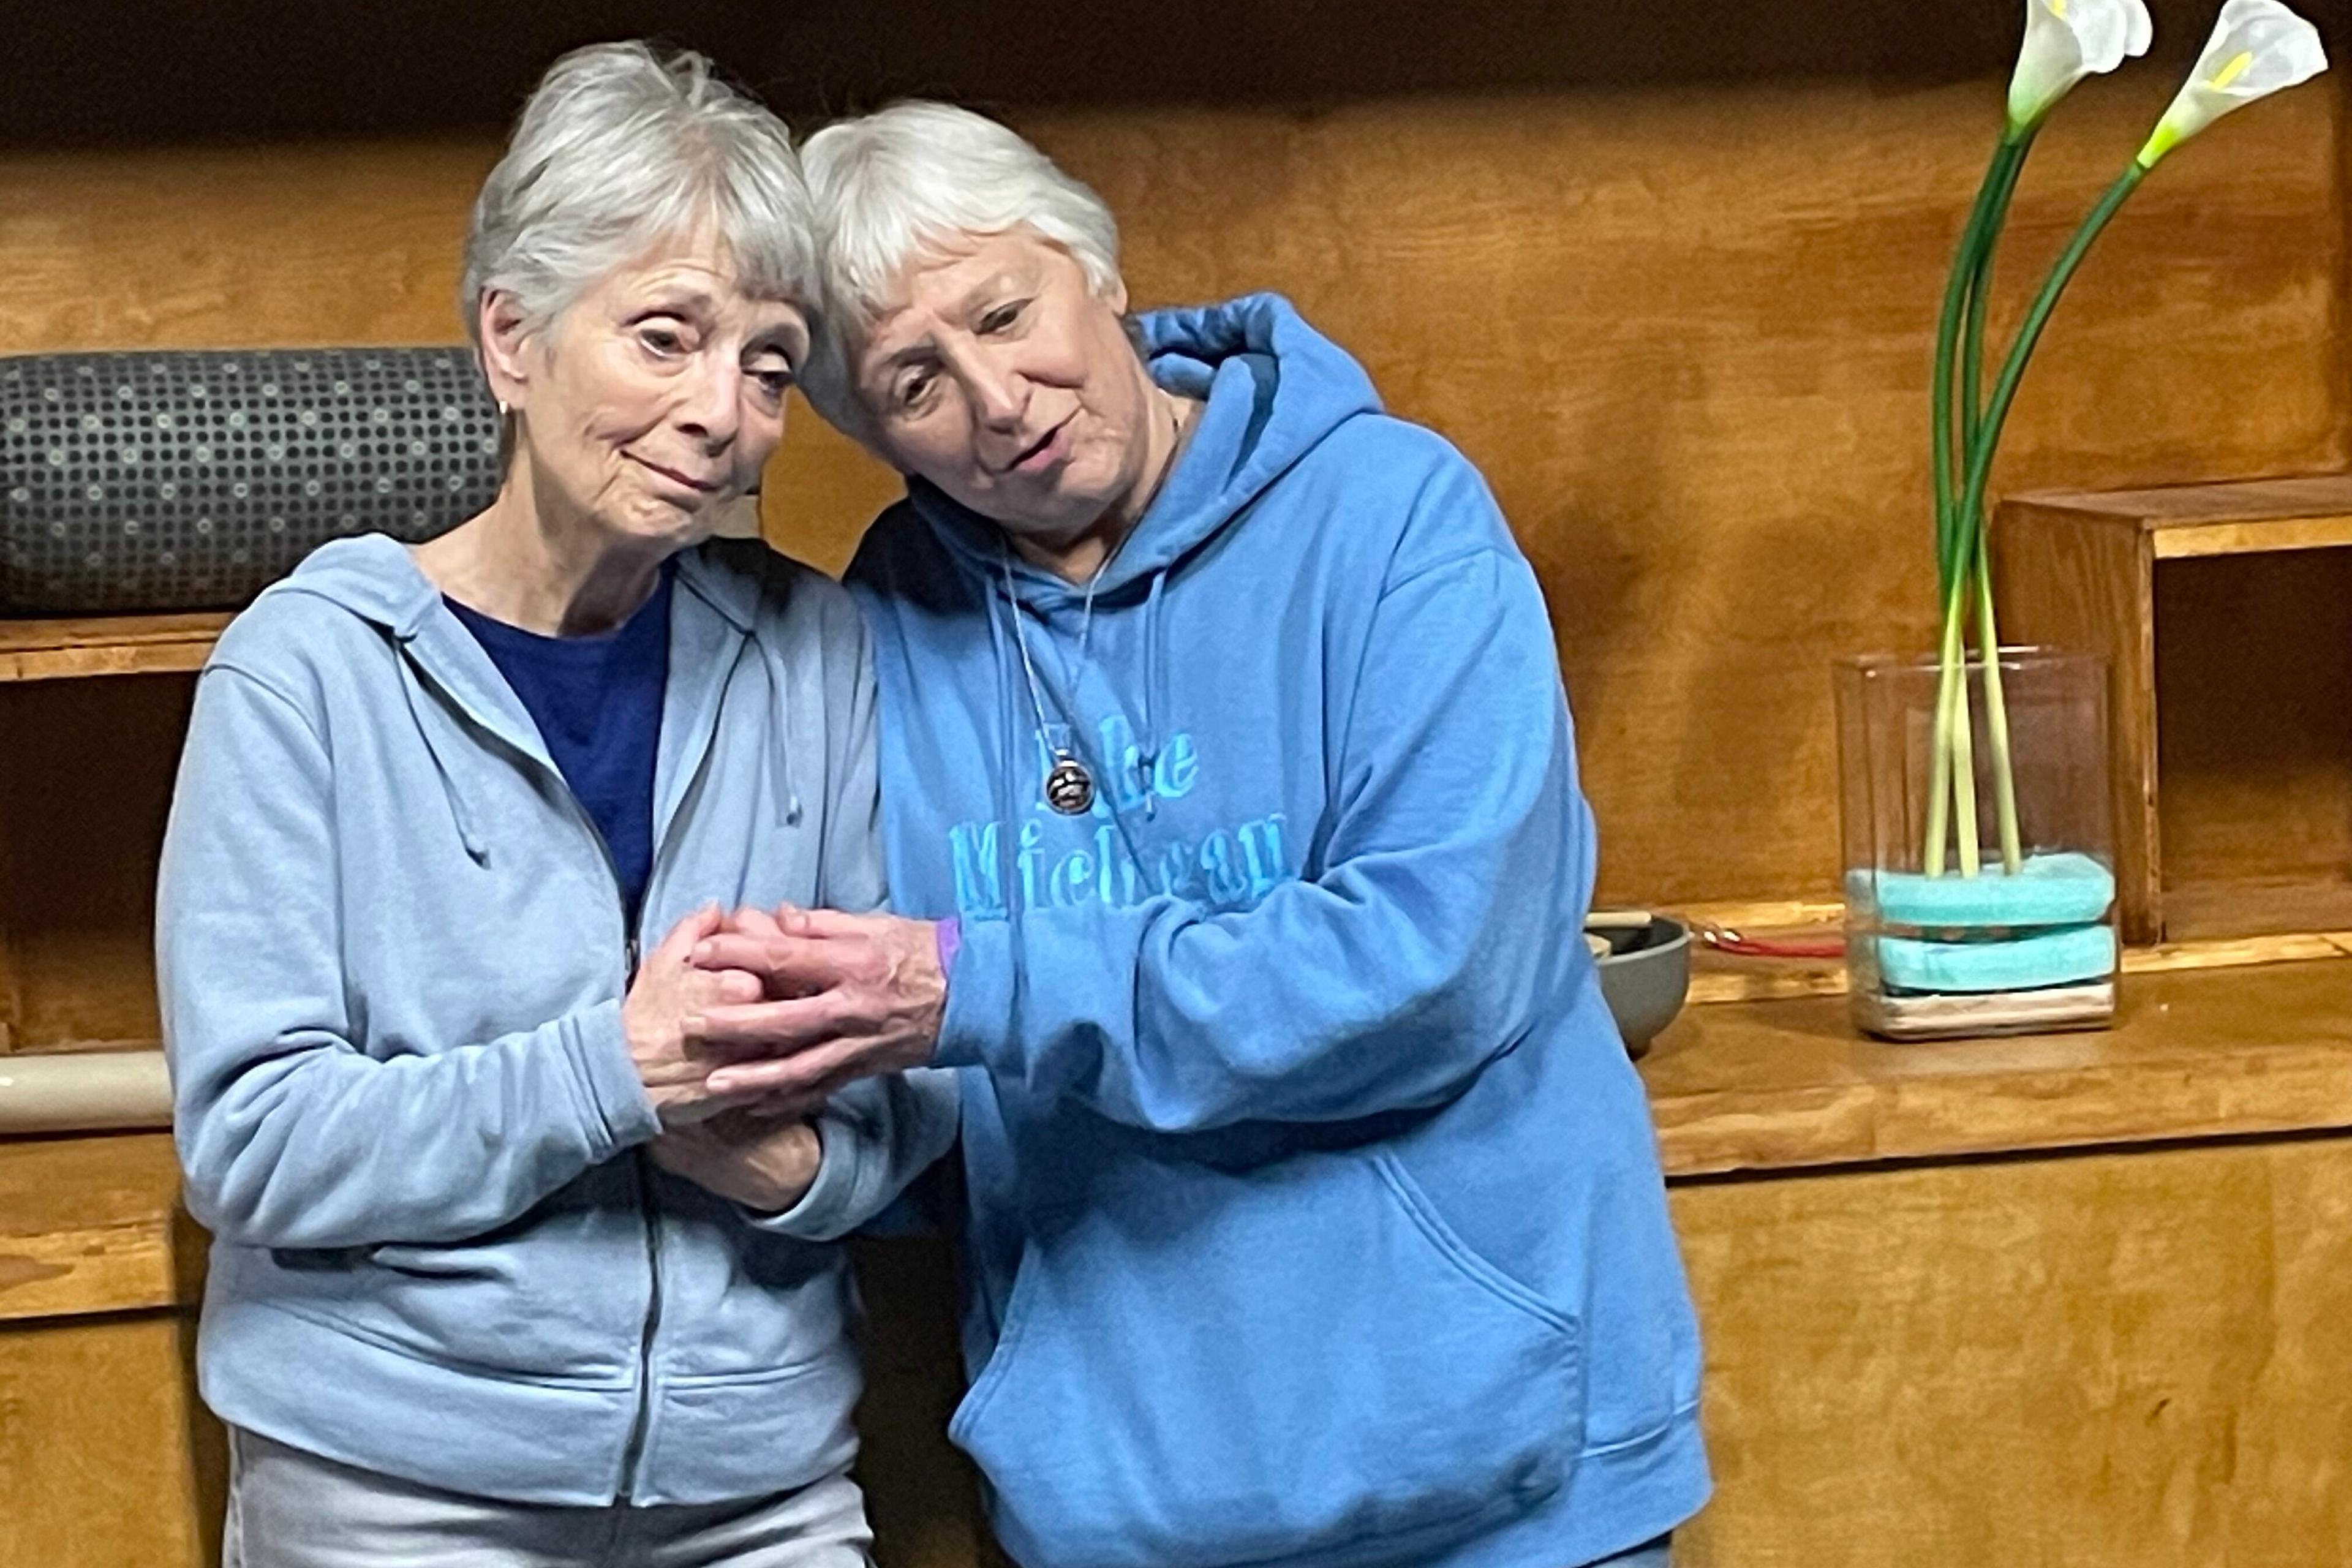 Billie McBride, left, and Anne Oberbroeckling at rehearsal for “The Heartbeat of the Sun” at the Cherry Creek Theatre.